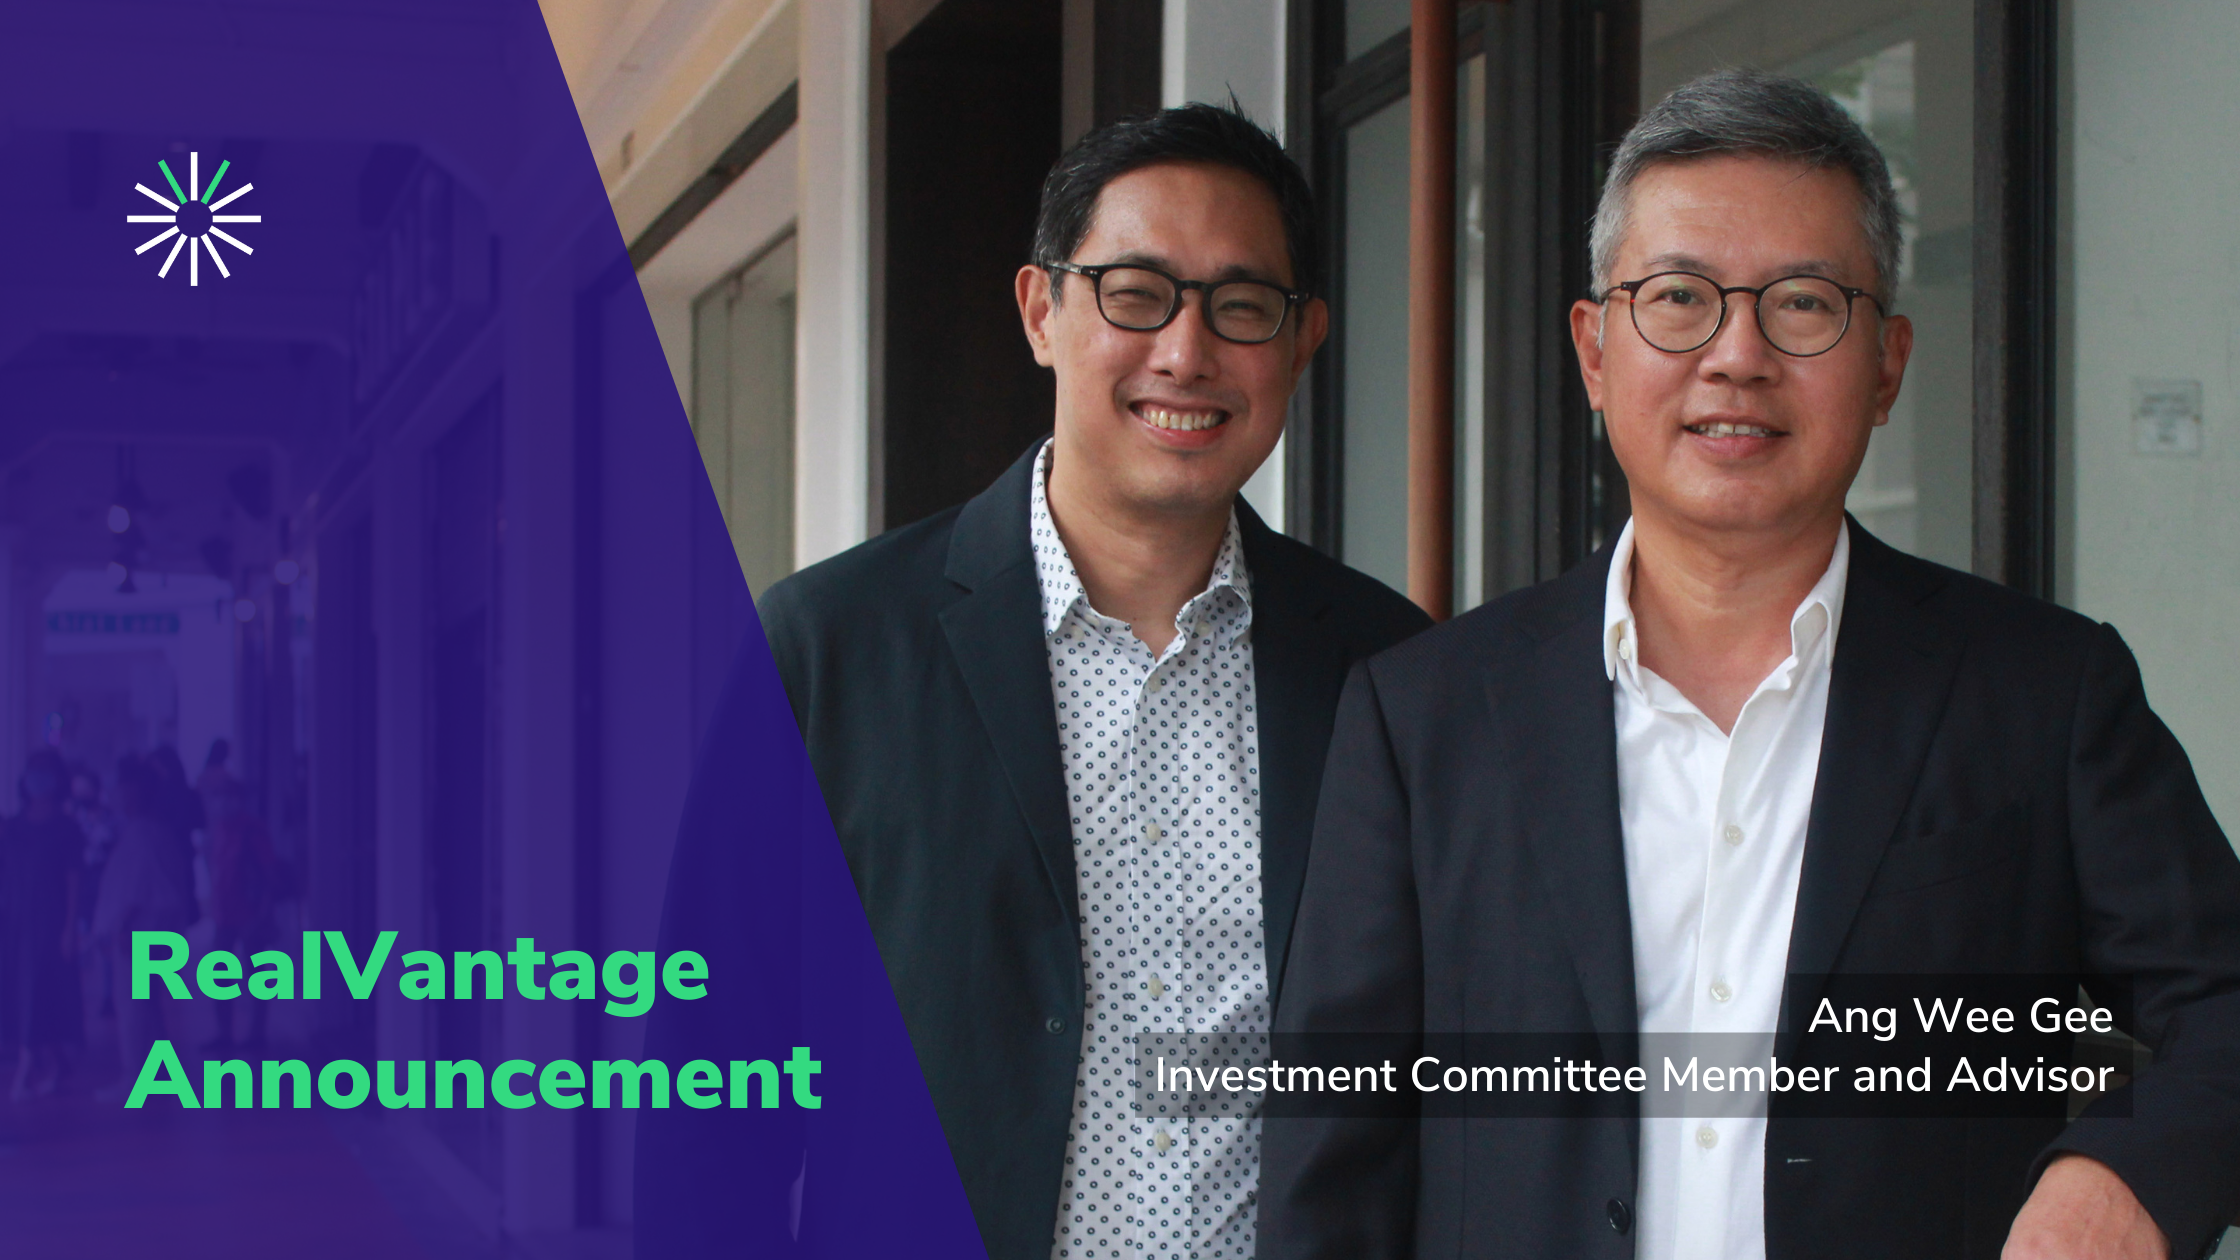 RealVantage Welcomes Ang Wee Gee as Investment Committee Member and Advisor